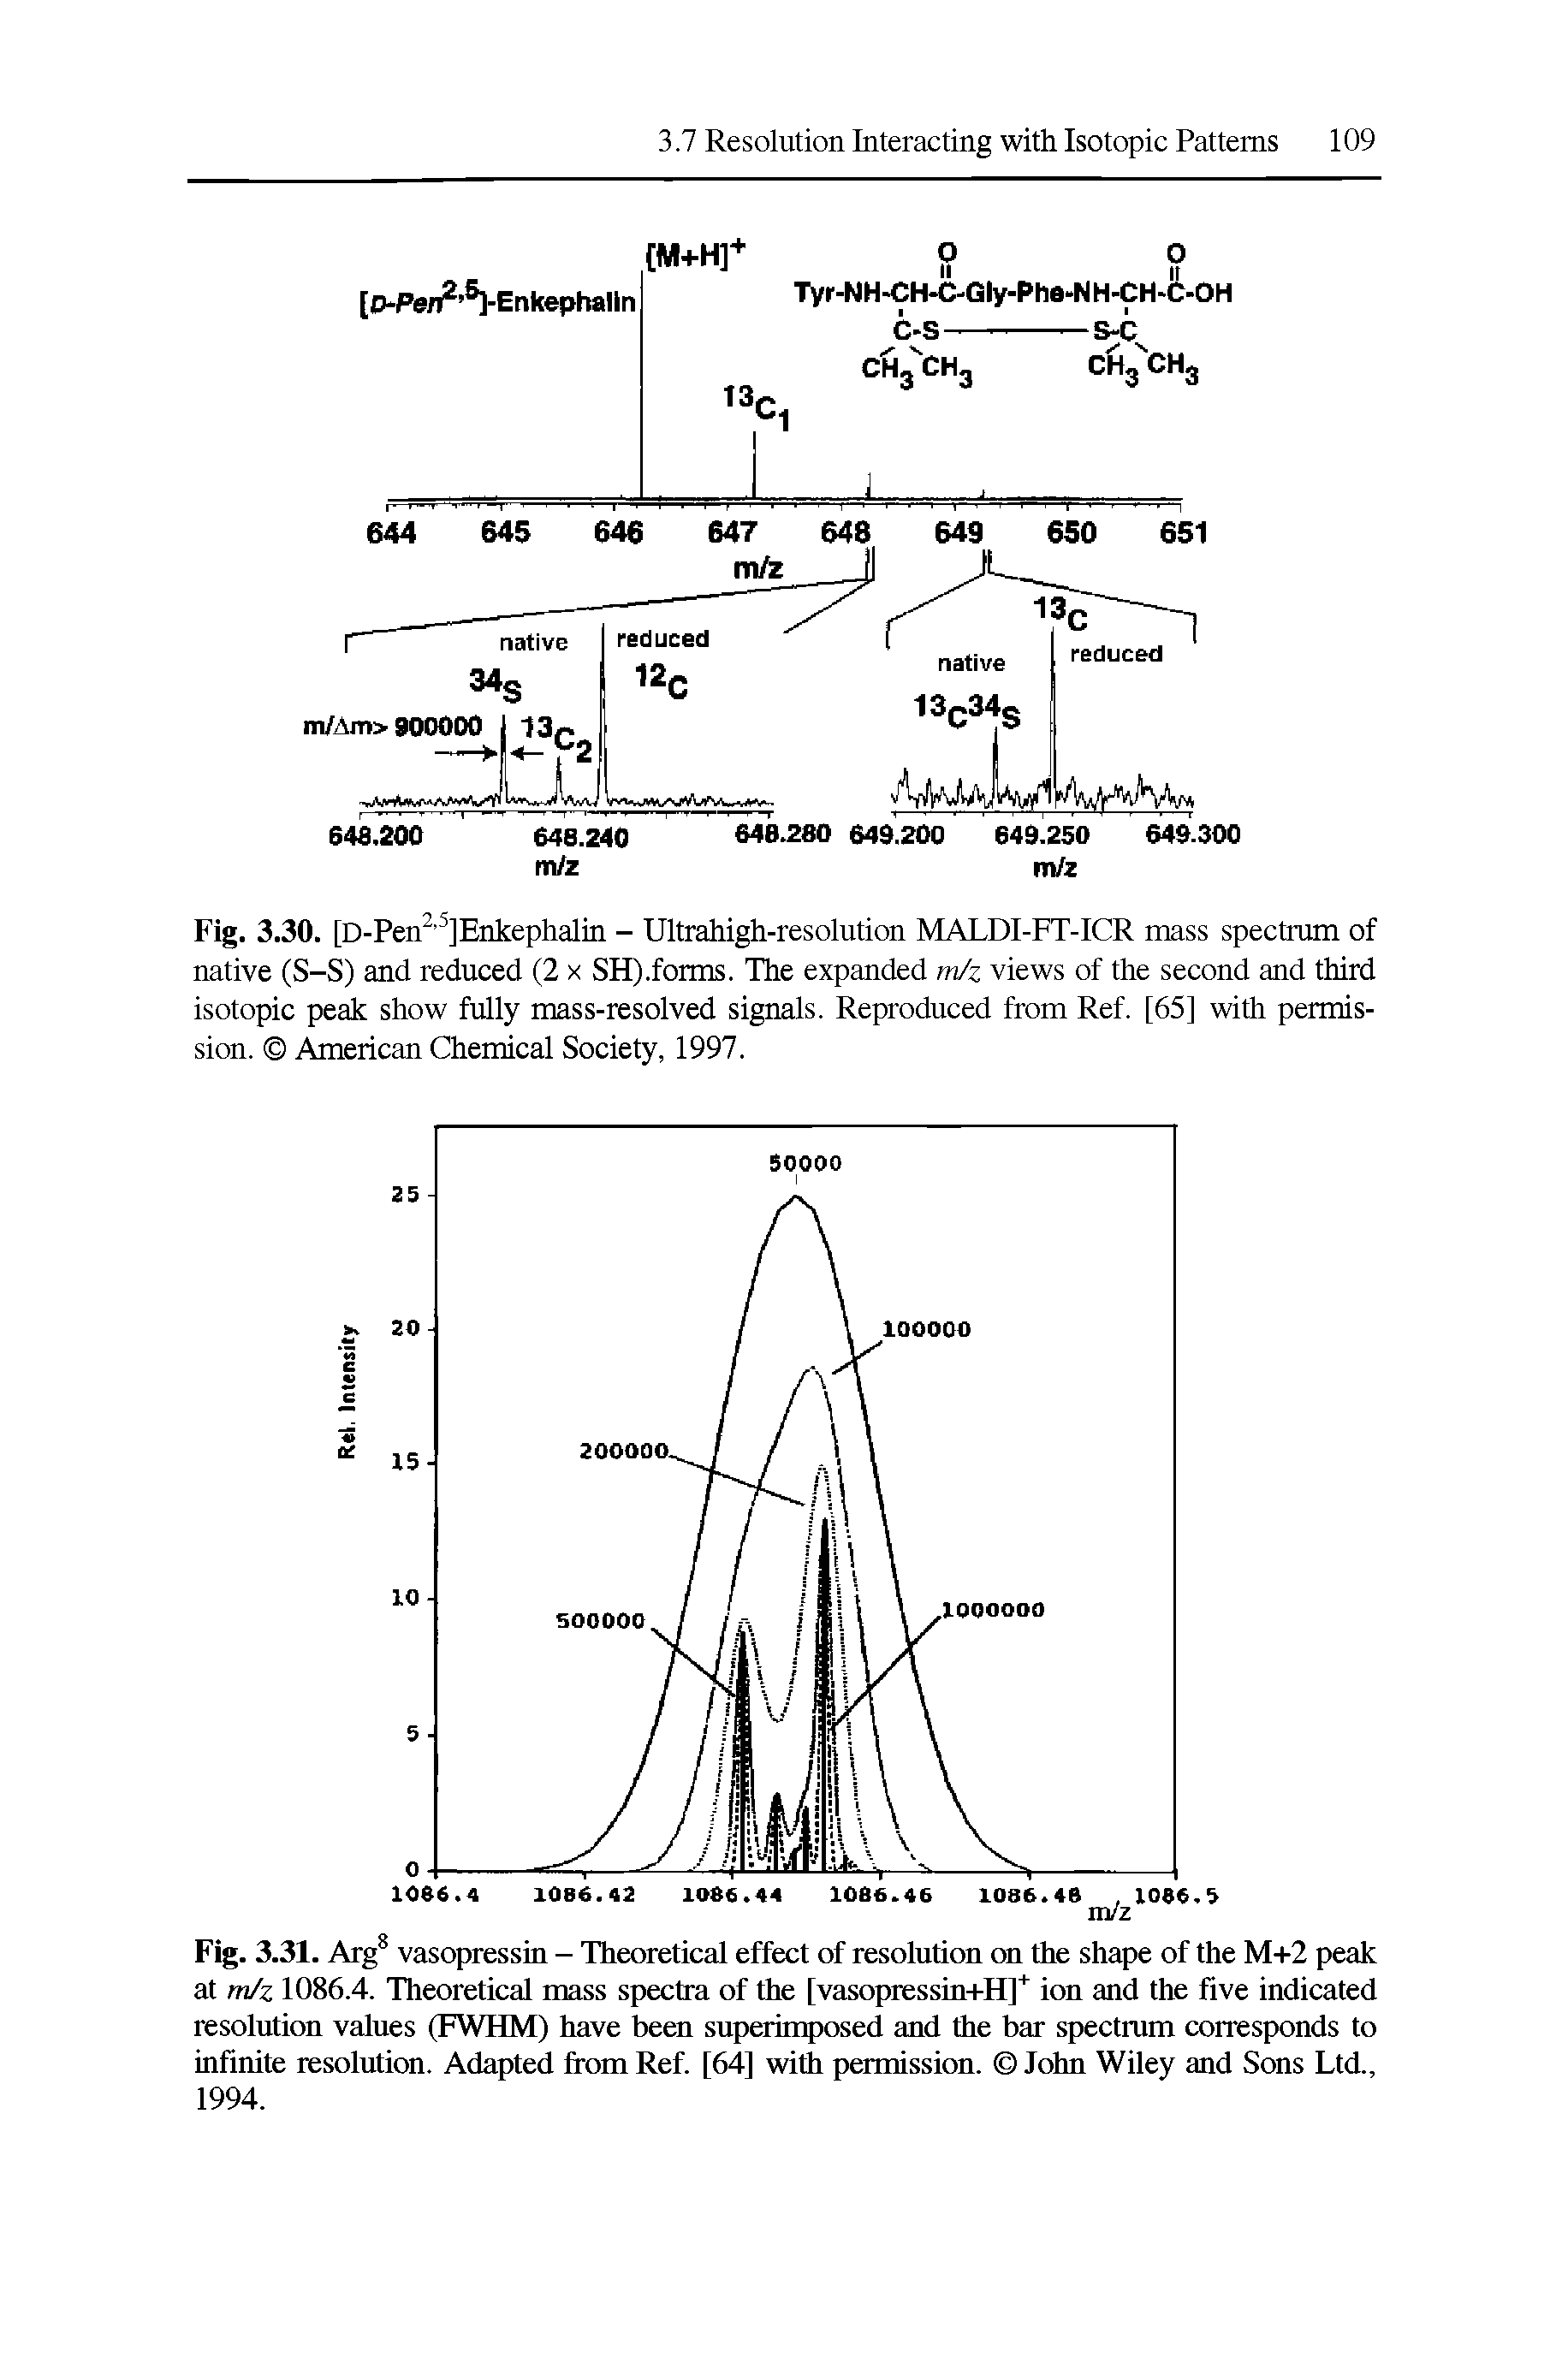 Fig. 3.31. Arg vasopressin - Theoretical effect of resolution on the shape of the M+2 peak at m/z 1086.4. Theoretical mass spectra of the [vasopressin+H] ion and the five indicated resolution values (FWHM) have been superimposed and the bar spectrum corresponds to infinite resolution. Adapted from Ref [64] with permission. John Wiley and Sons Ltd., 1994.